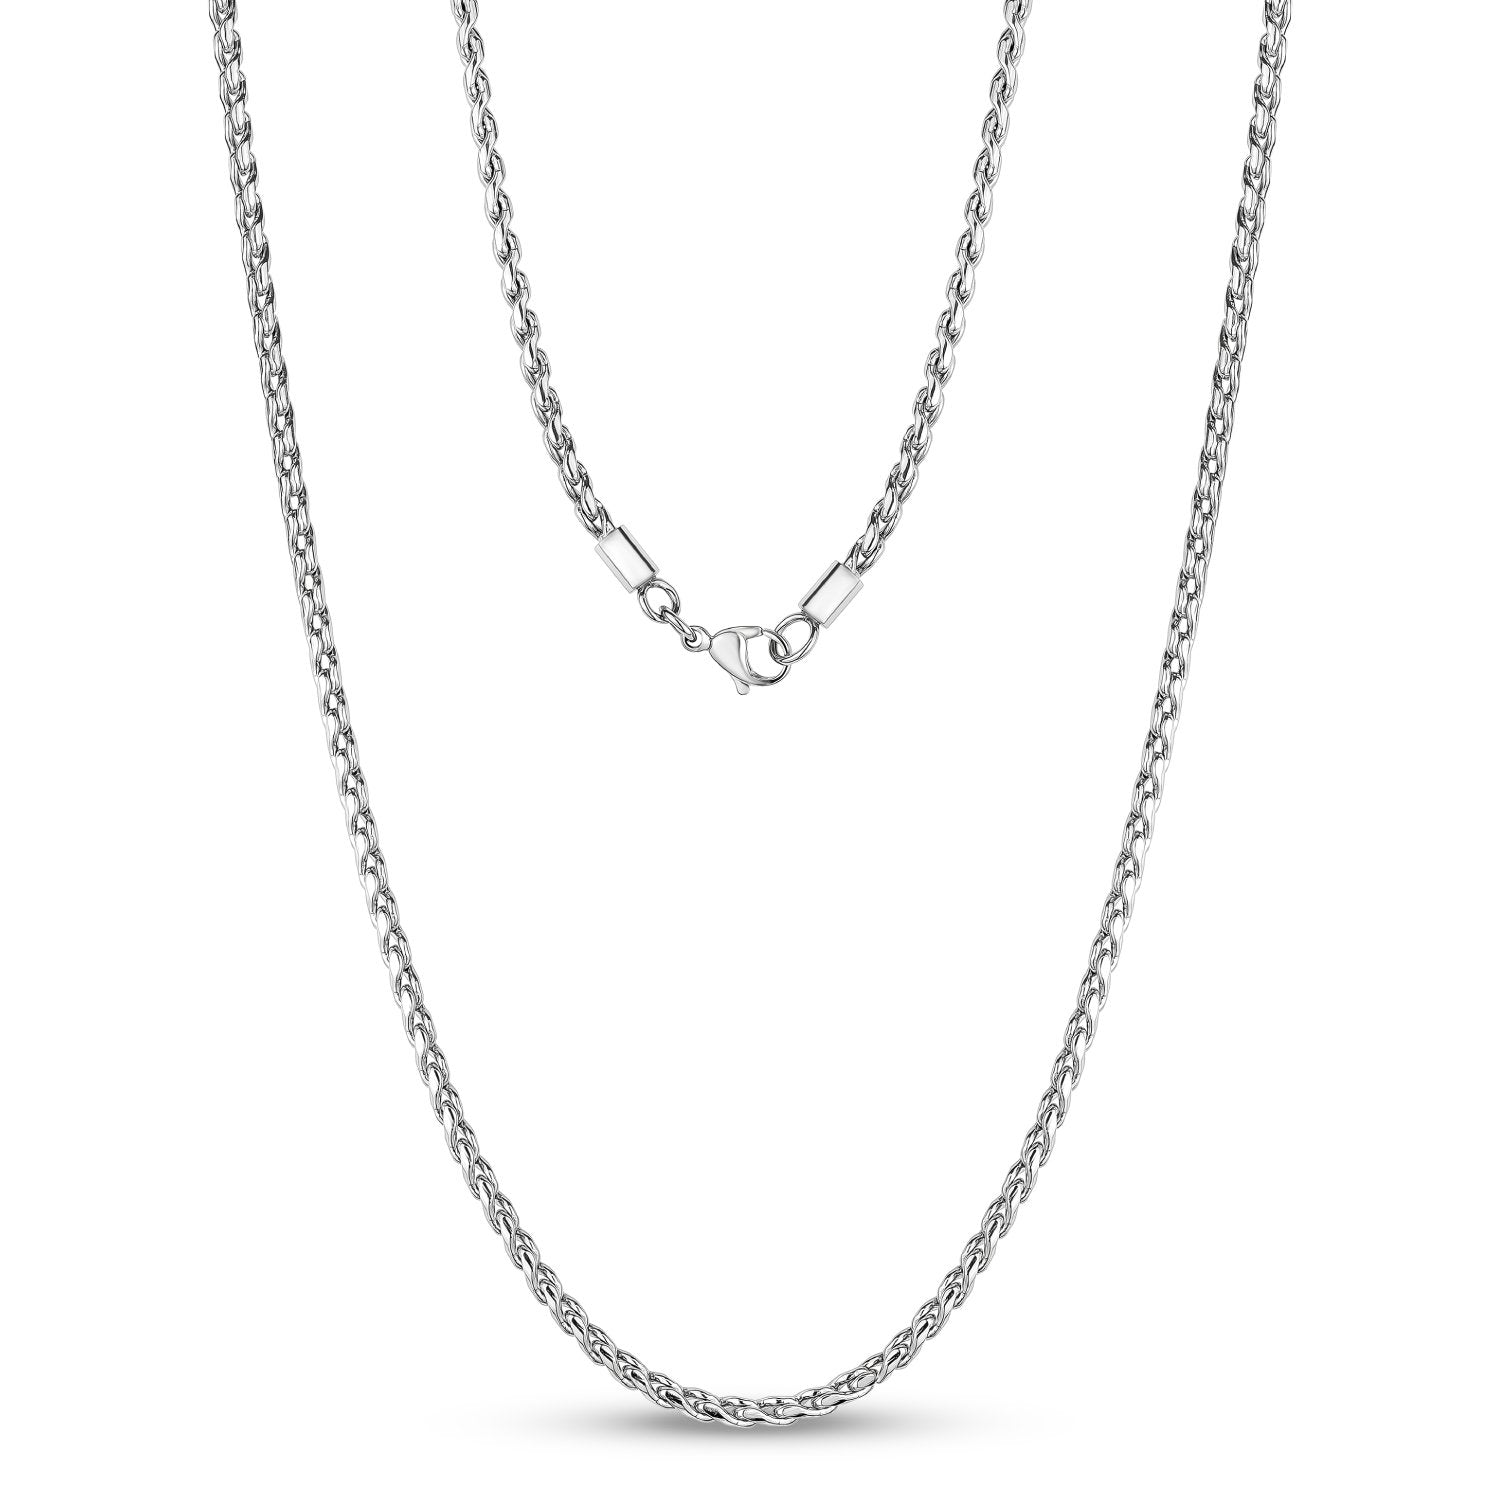 Serpentine Chain Necklace | Dogeared